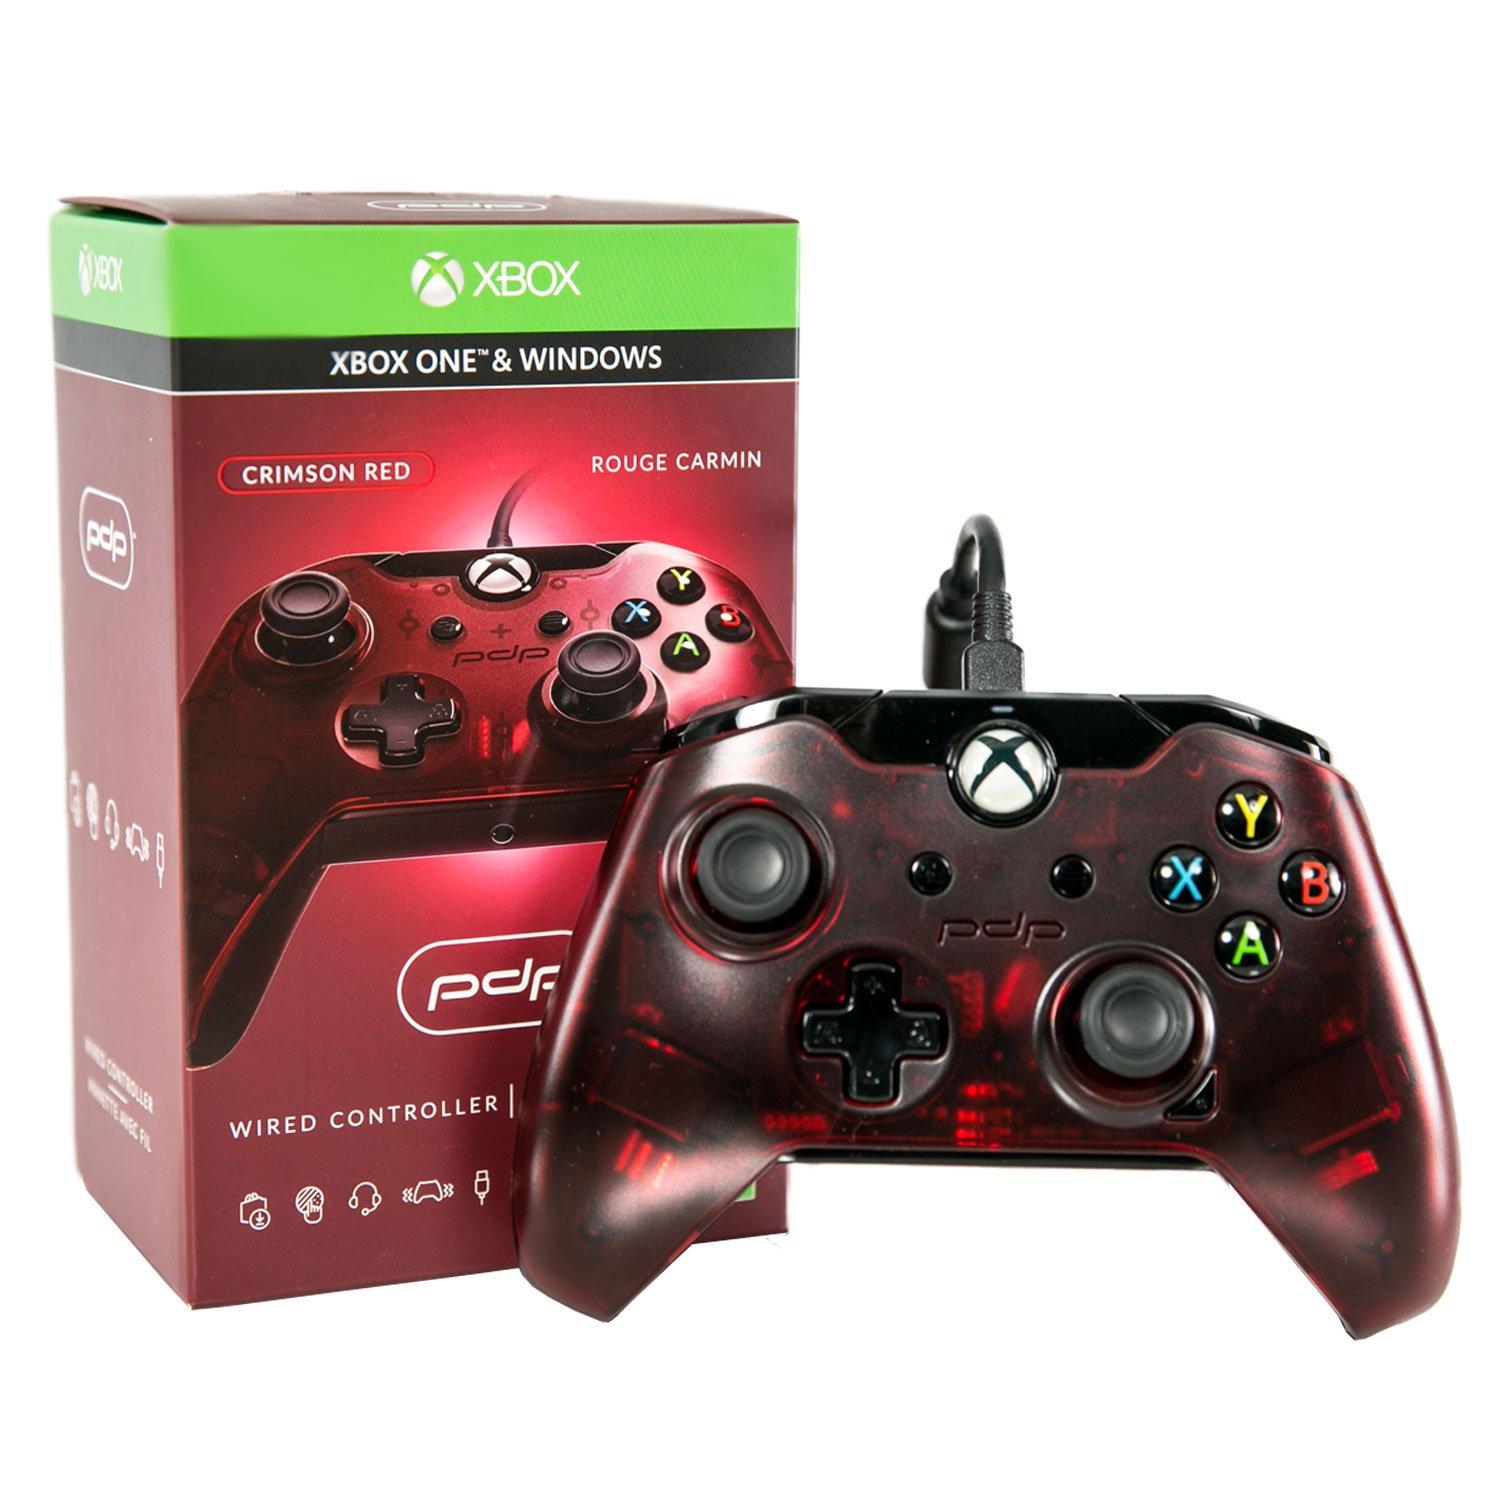 xbox one controller red camo